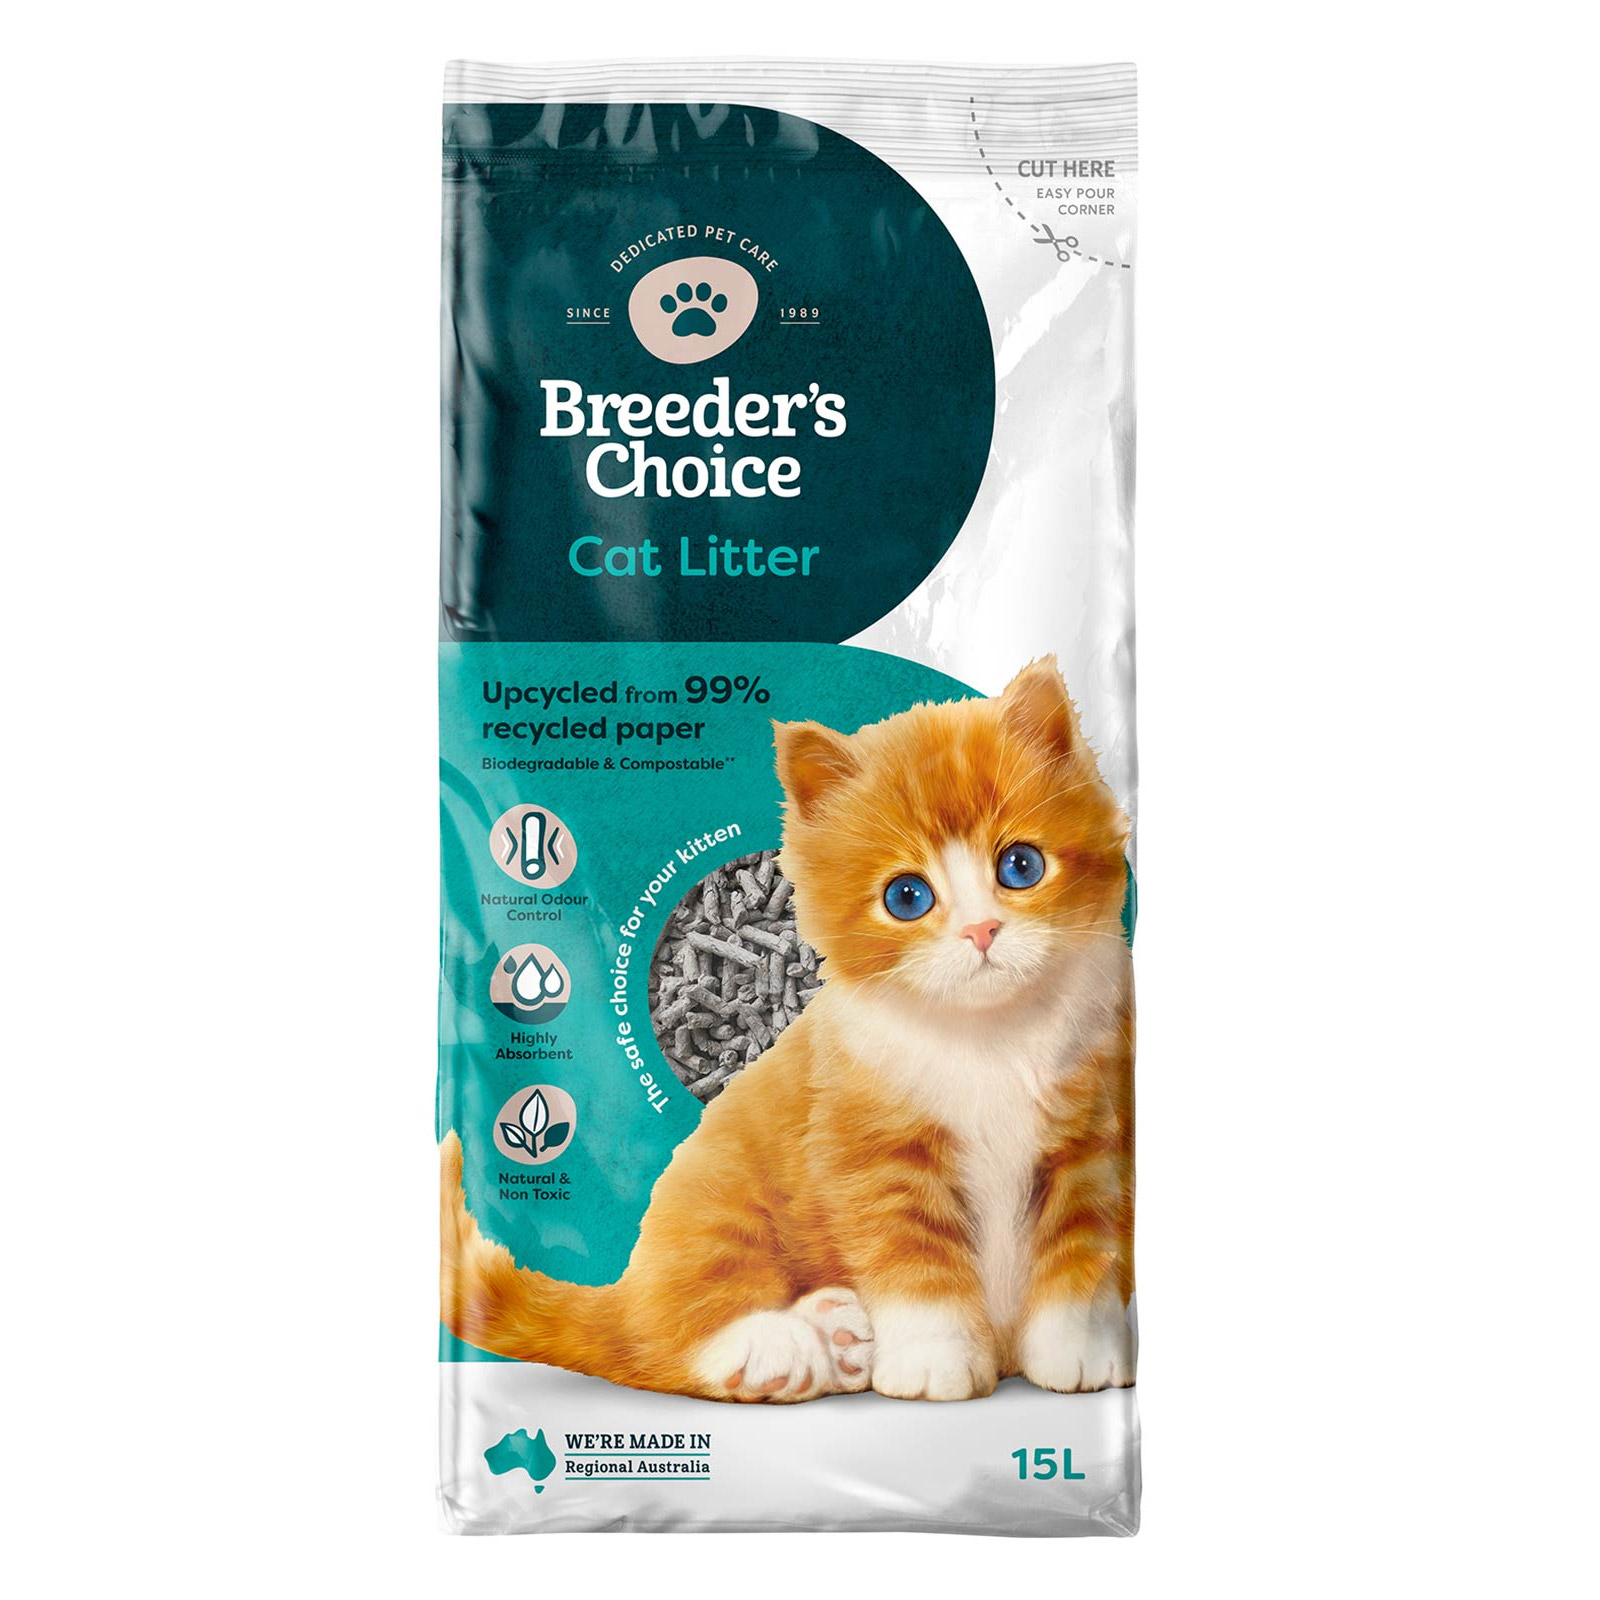 Breeder's Choice Litter for Cats